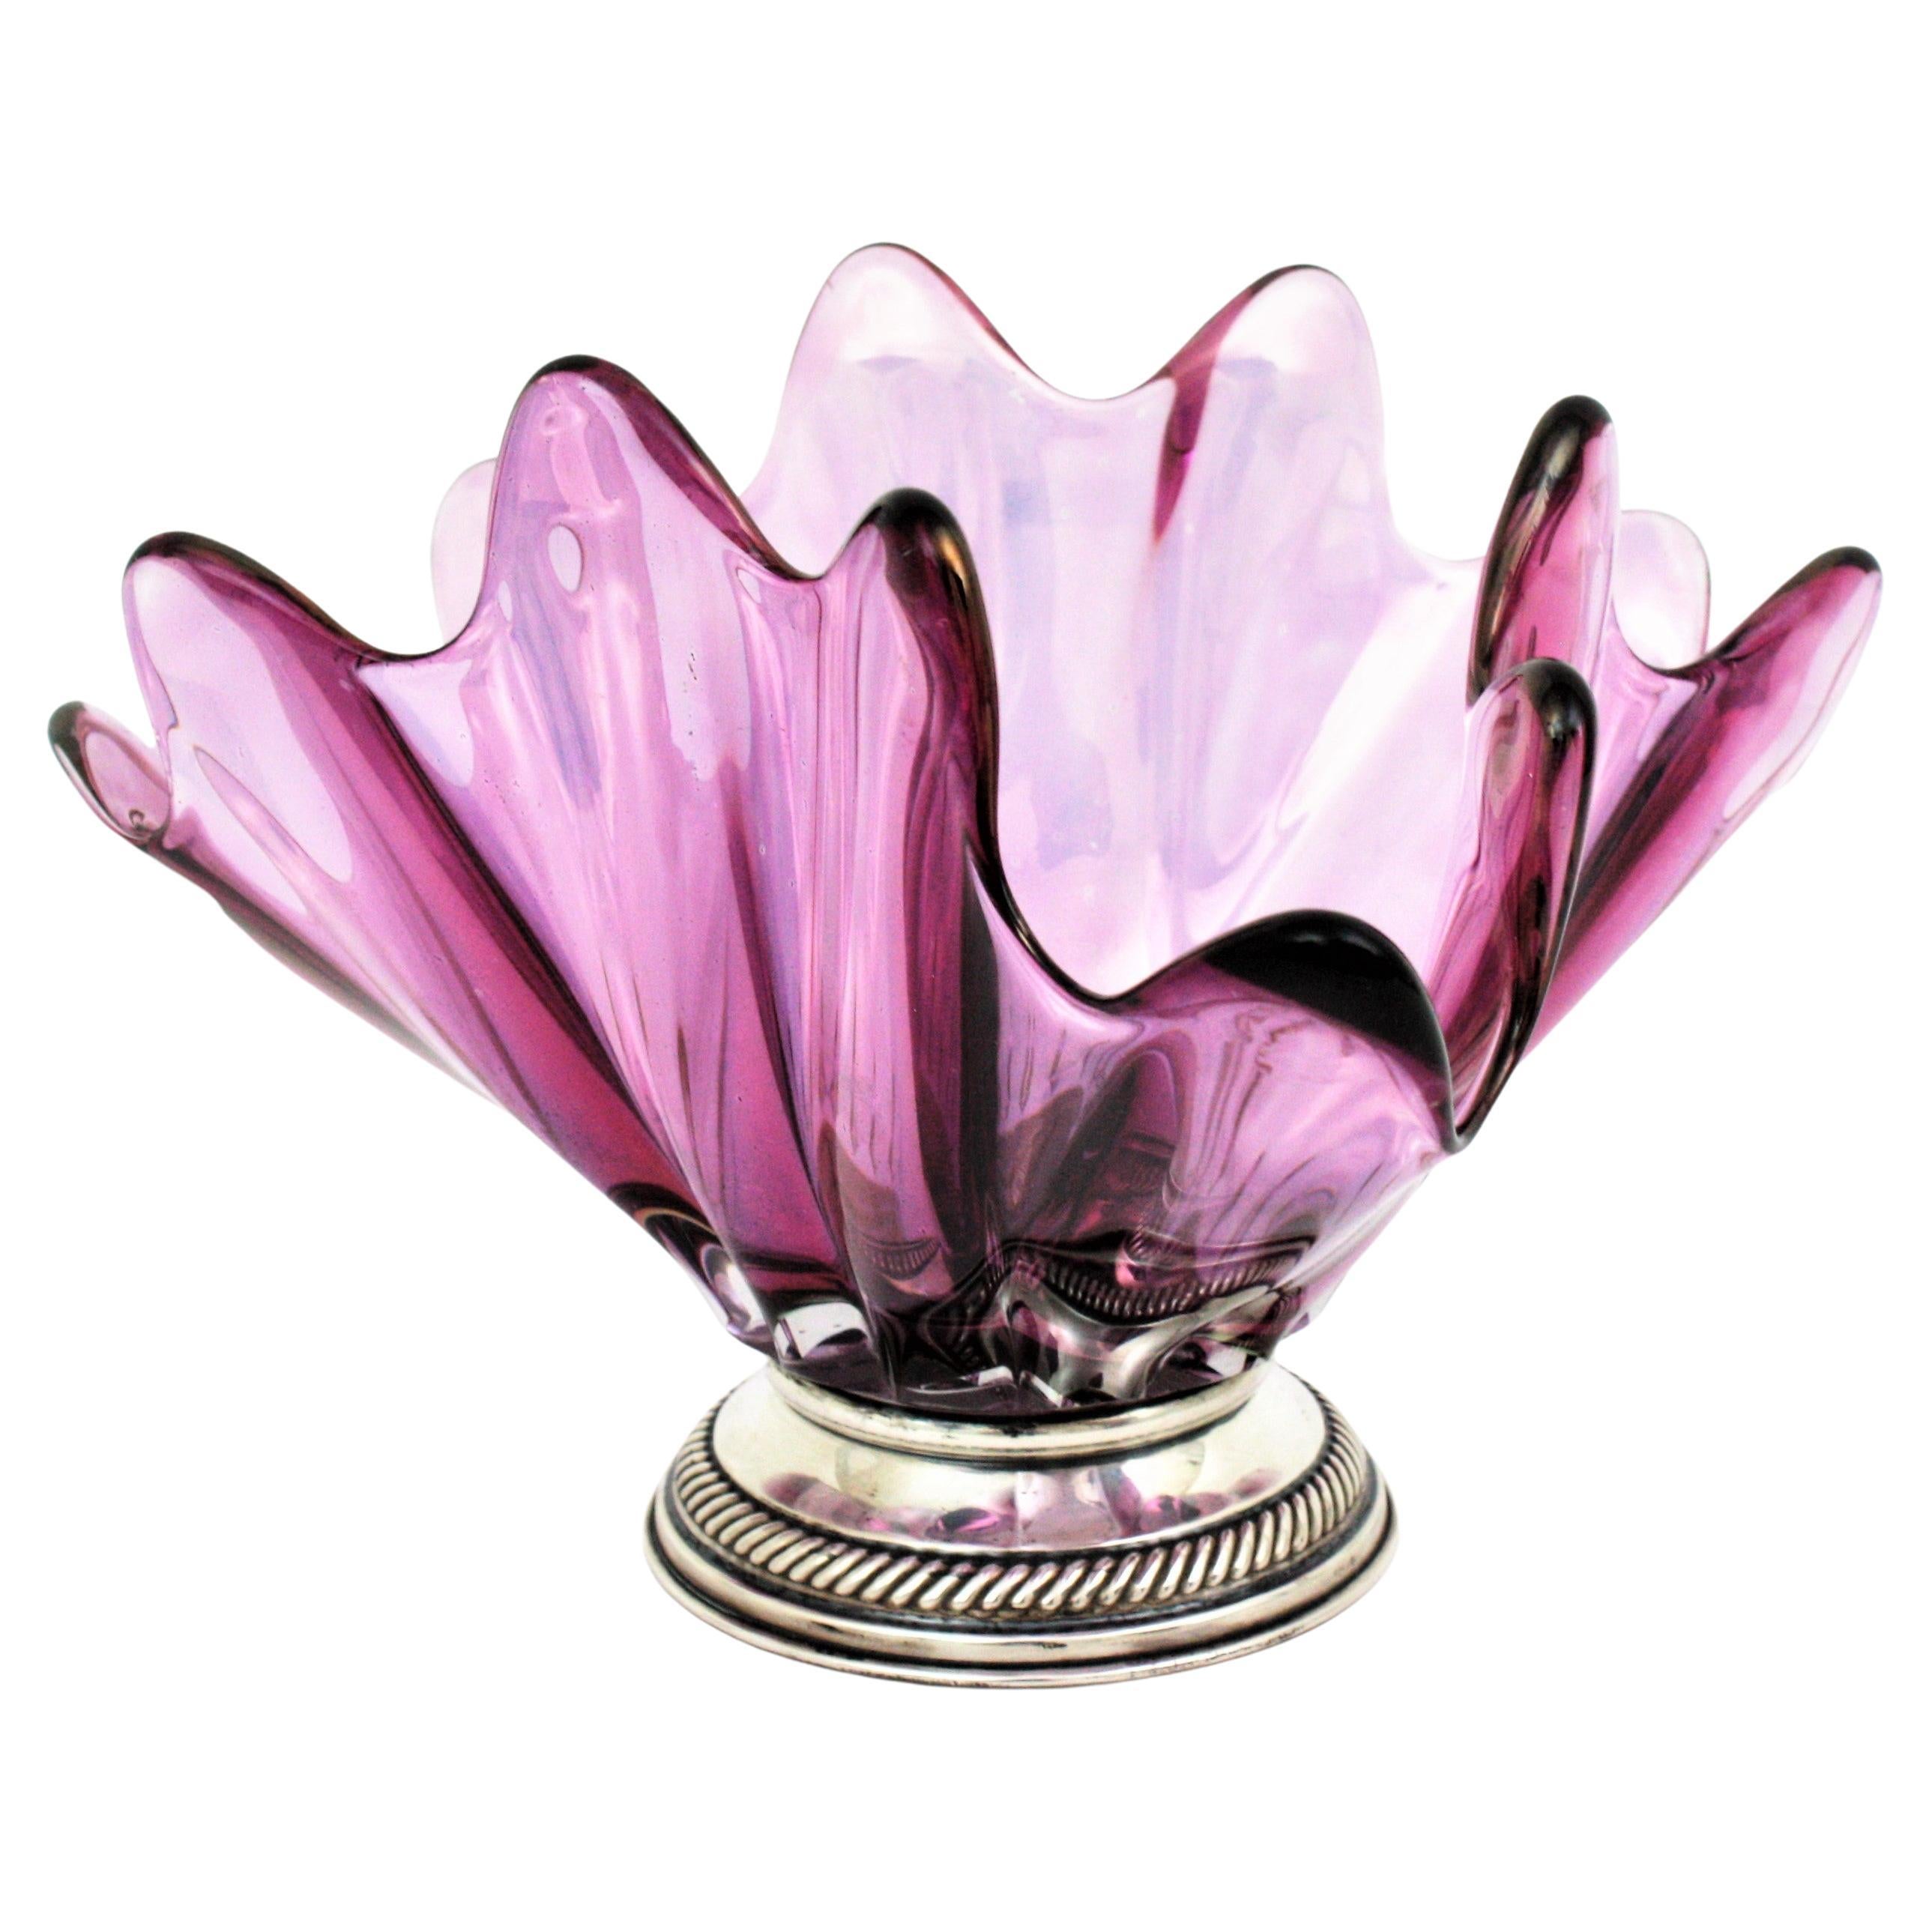 Hand blown pink purple Italian art glass vase with Sterling Silver base Italy, 1950s.
This eye-catching and colorful  centerpiece vase stands up on a silver base. It has a beautiful shape with naturalistic design and stunning irisdiscent